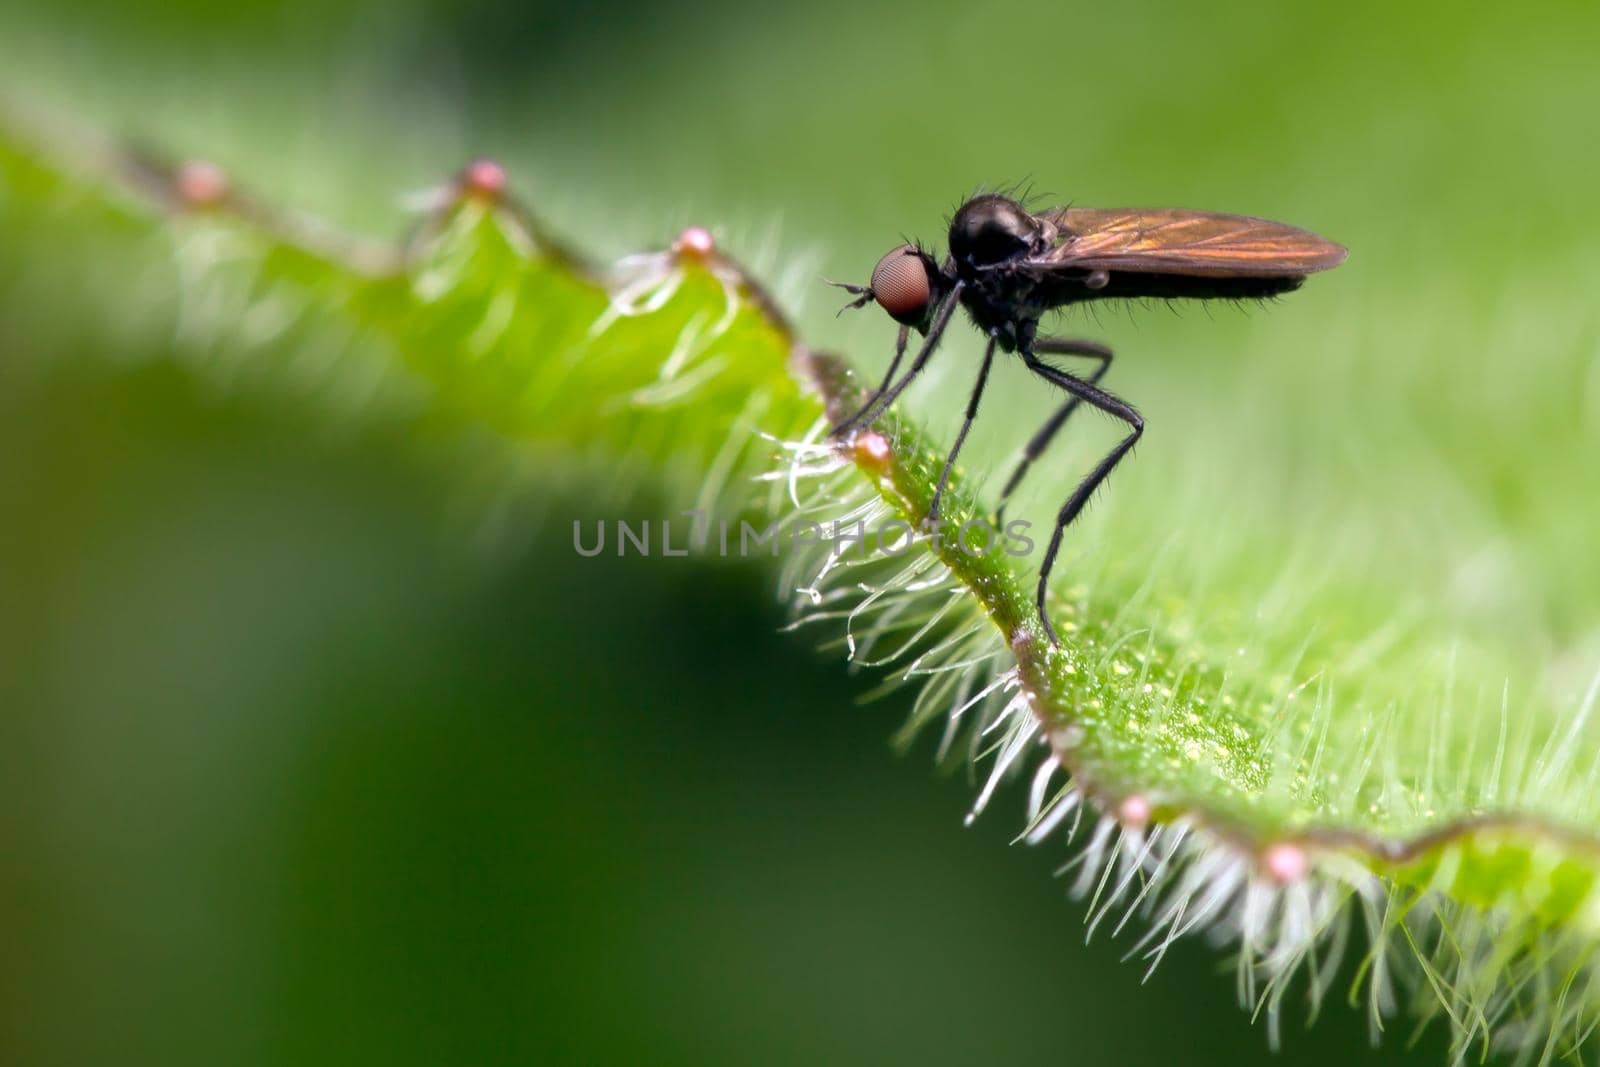 Very small fly on the green leaf by Lincikas